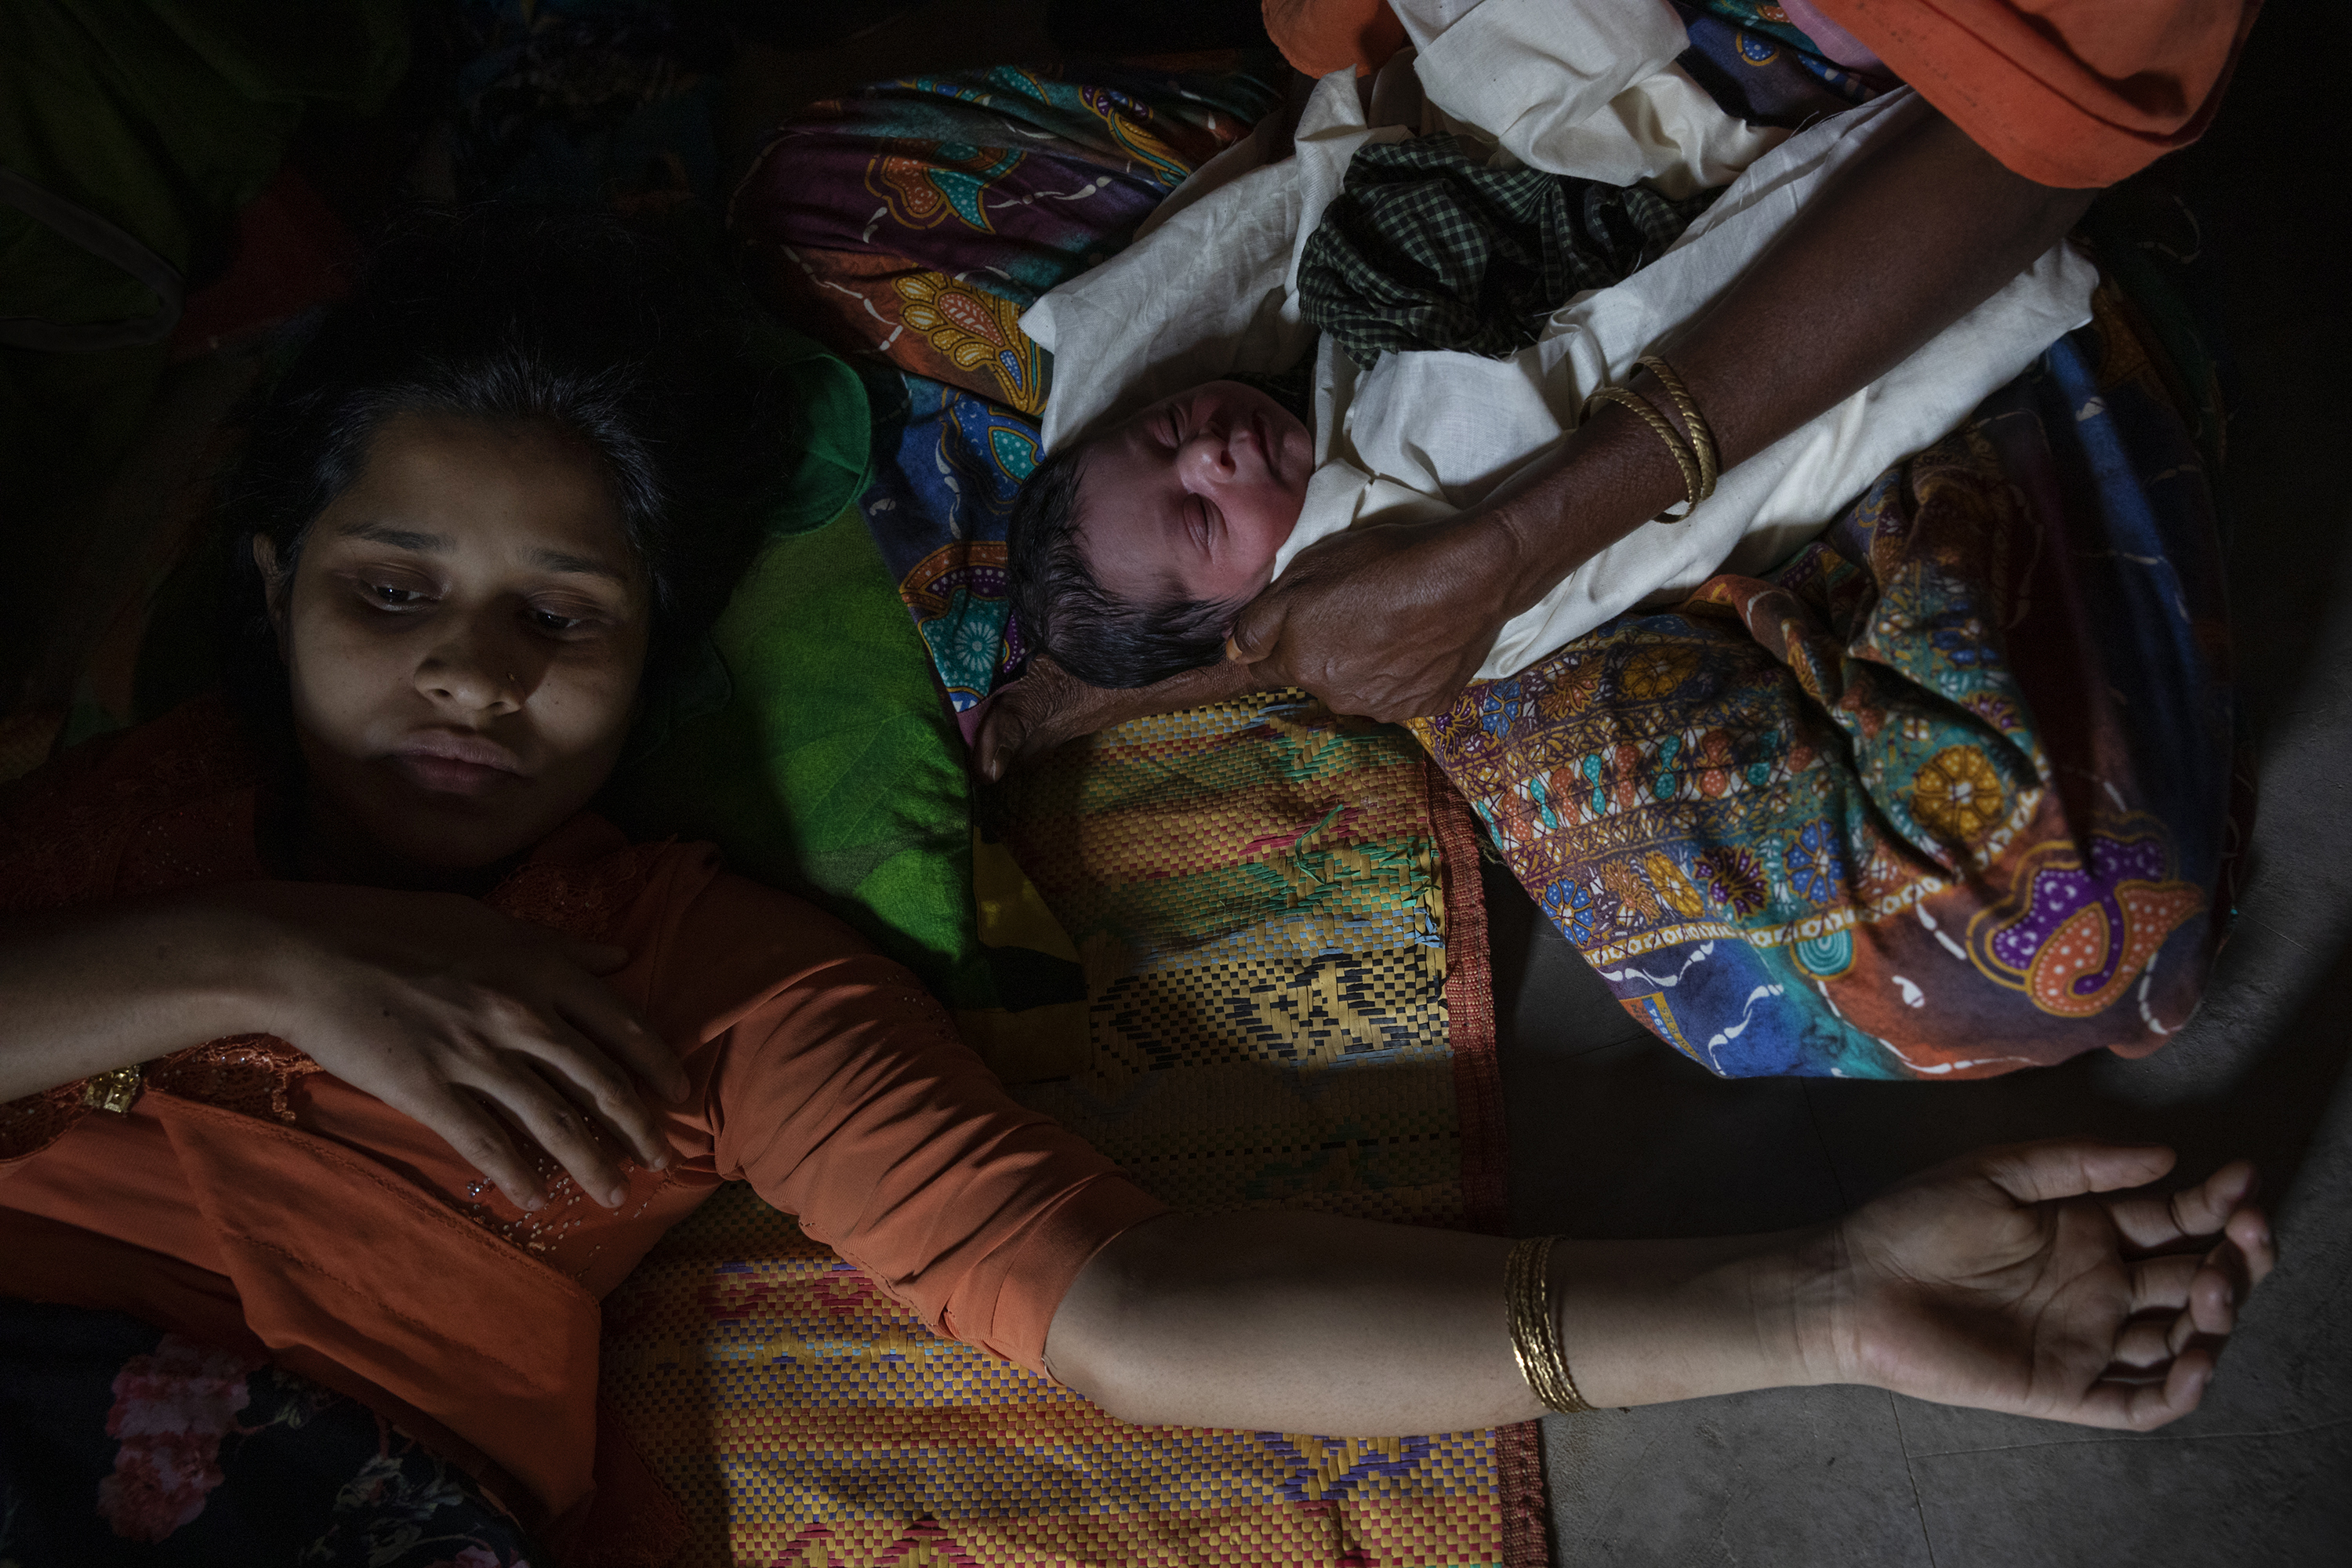 Umme Habiba, 18, following the birth of her daughter, Zahra. (James Nachtwey for TIME)